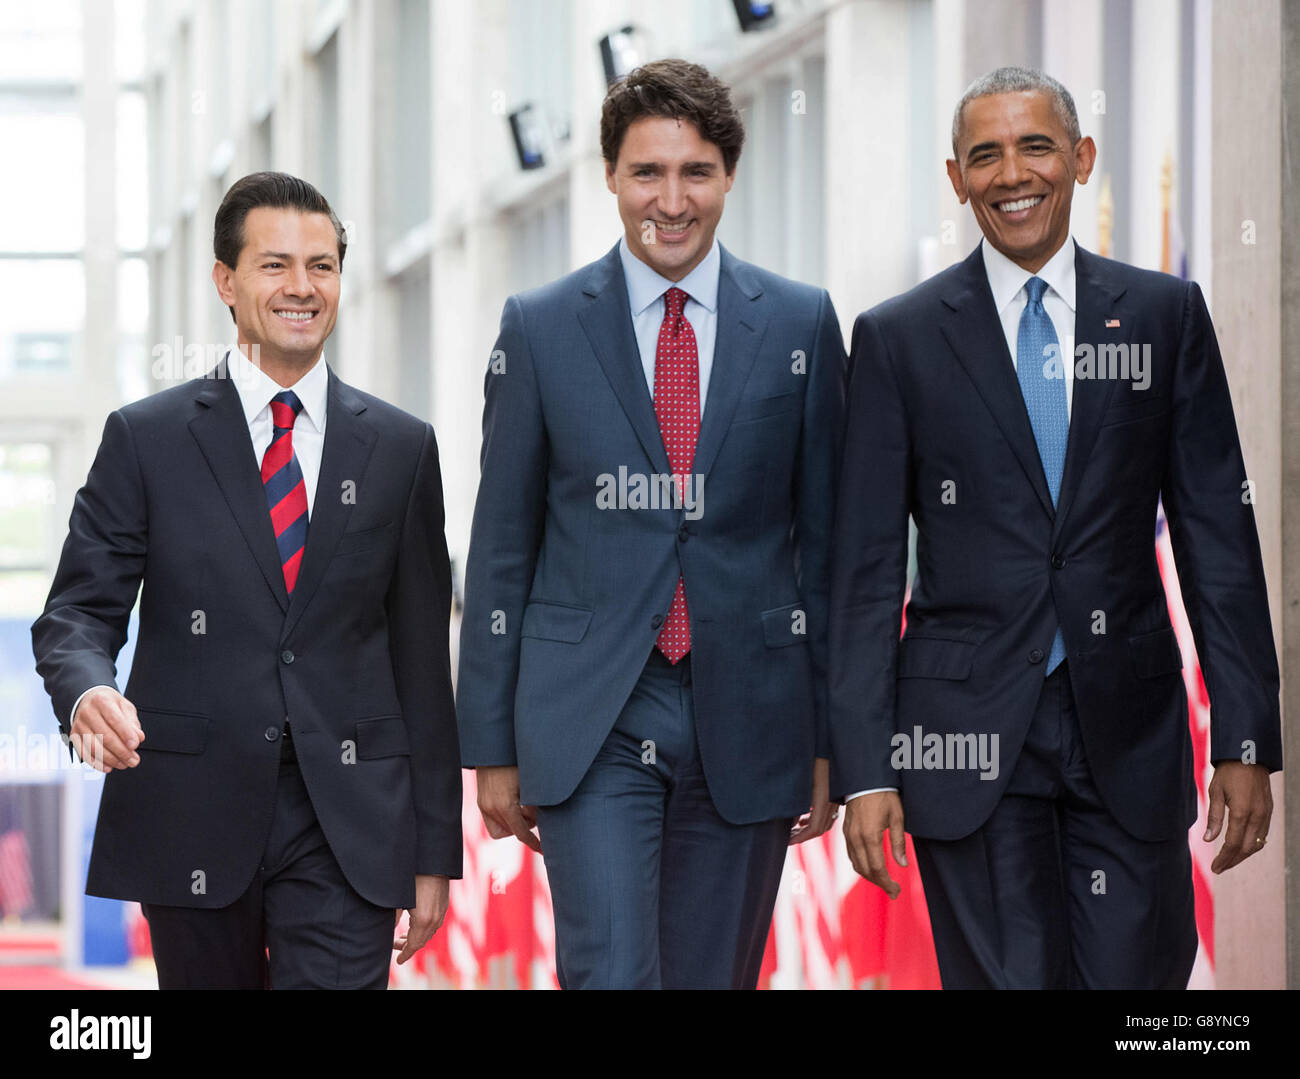 Ottawa, Canada. 29th June, 2016. Canadian Prime Minister Justin Trudeau, center, escorts Mexican President Enrique Pena Nieto, left, and U.S. President Barack Obama during the North American Leaders Summit at the National Gallery of Canada June 29, 2016 in Ottawa, Canada. Credit:  Planetpix/Alamy Live News Stock Photo